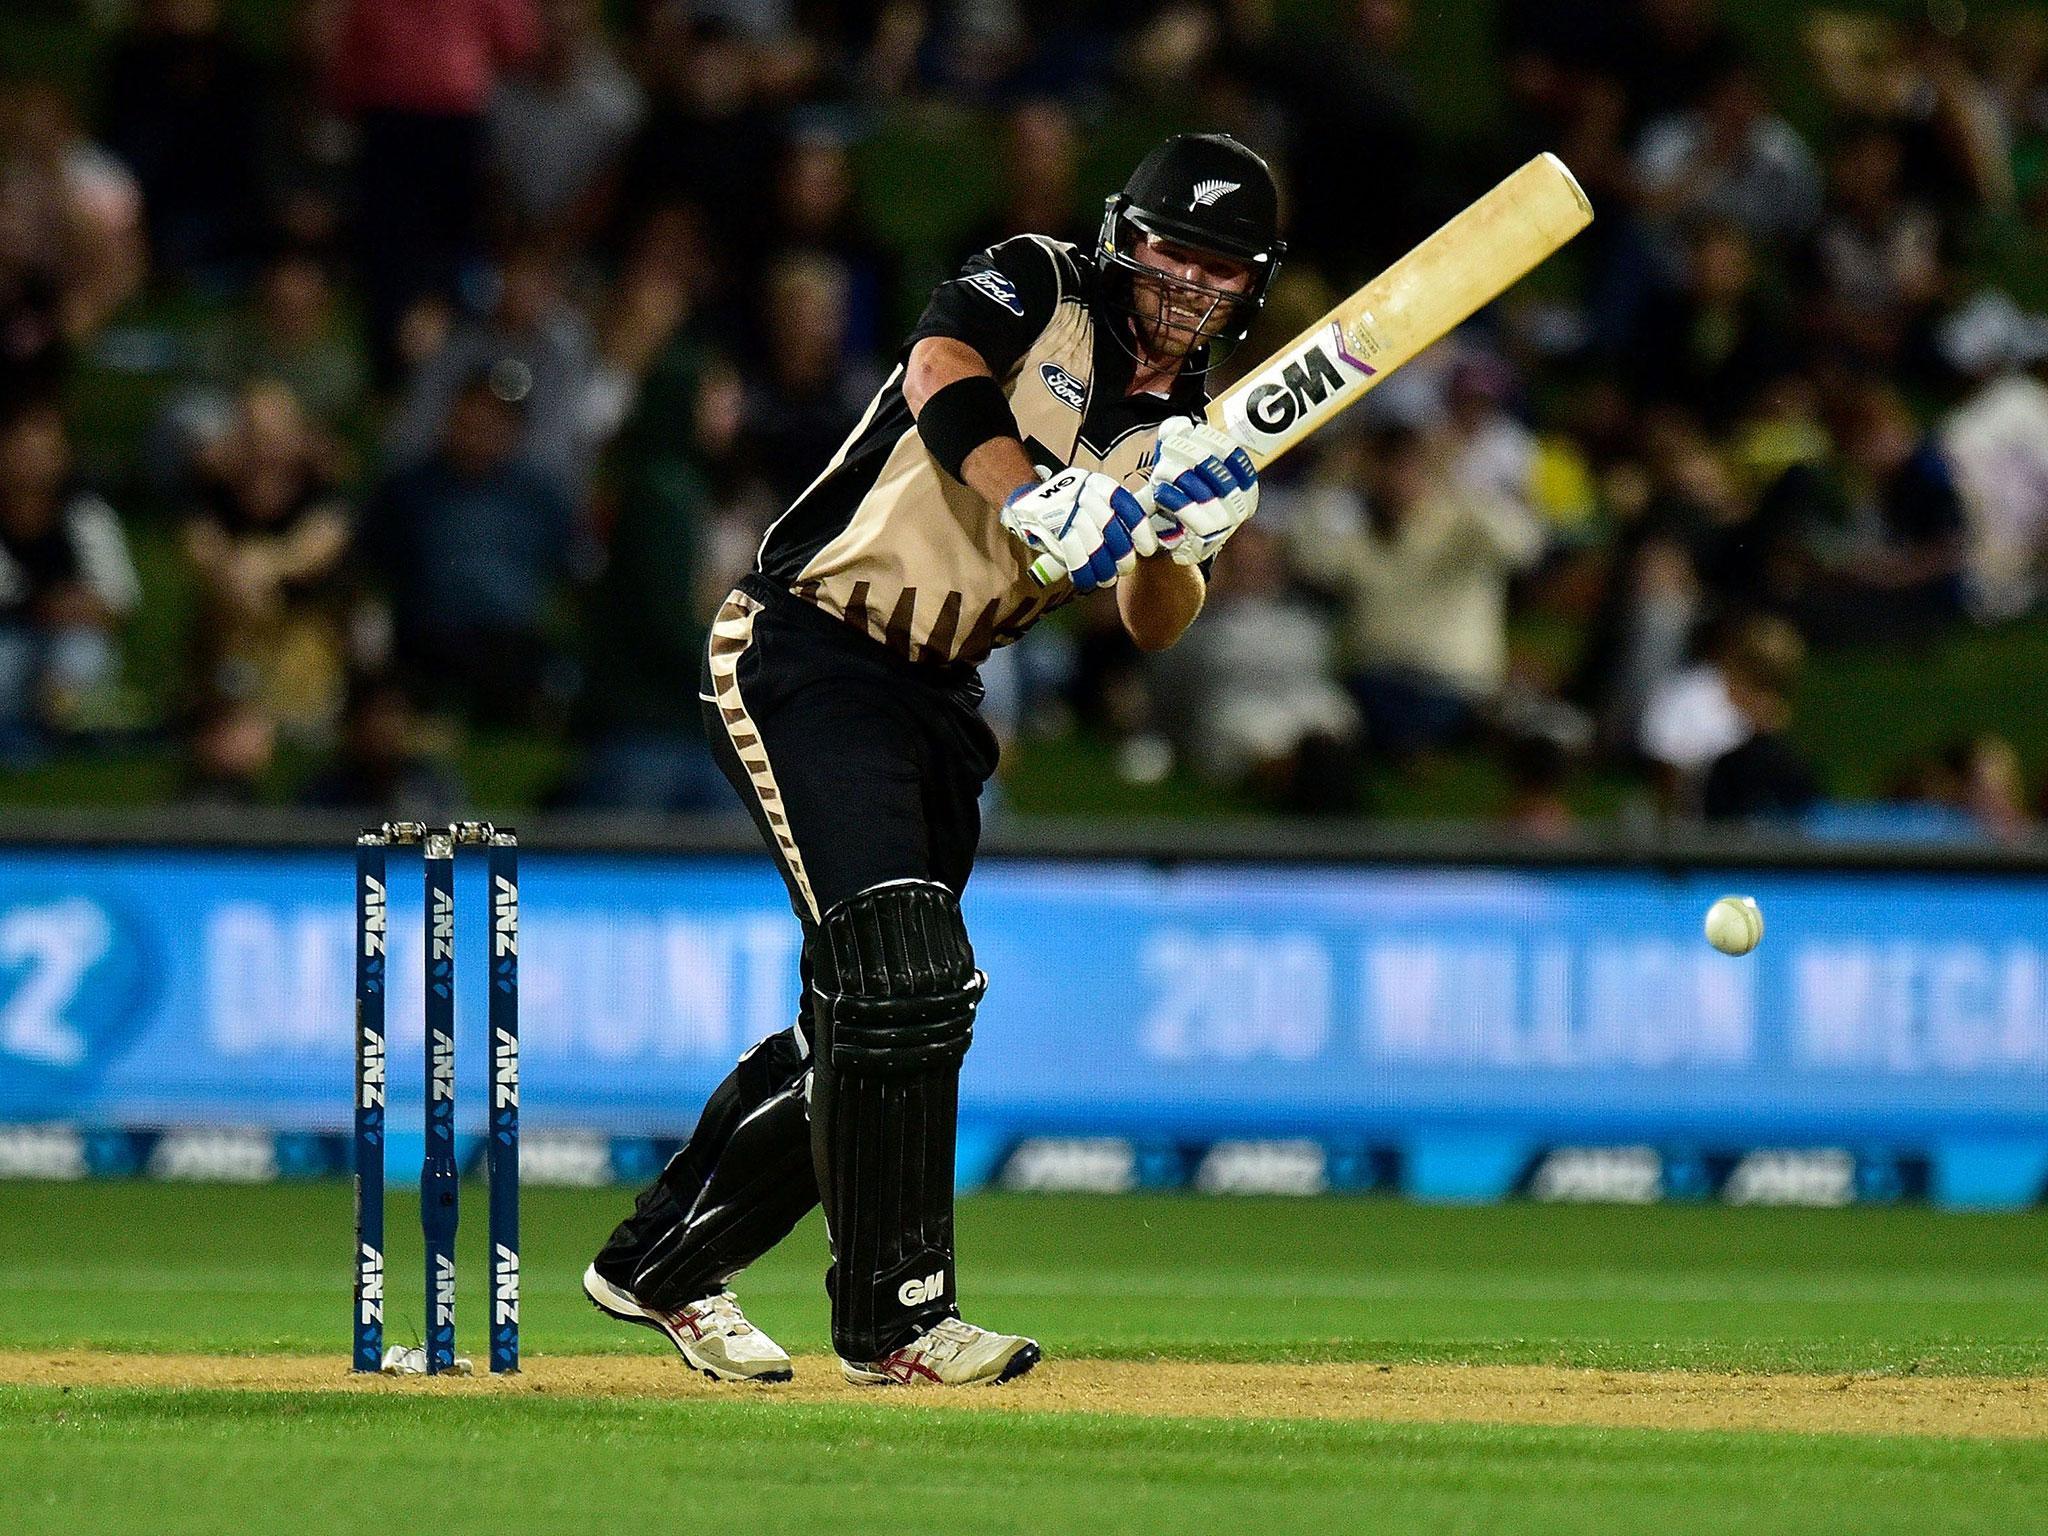 Anderson's 10 sixes is the highest by a New Zealander in this format